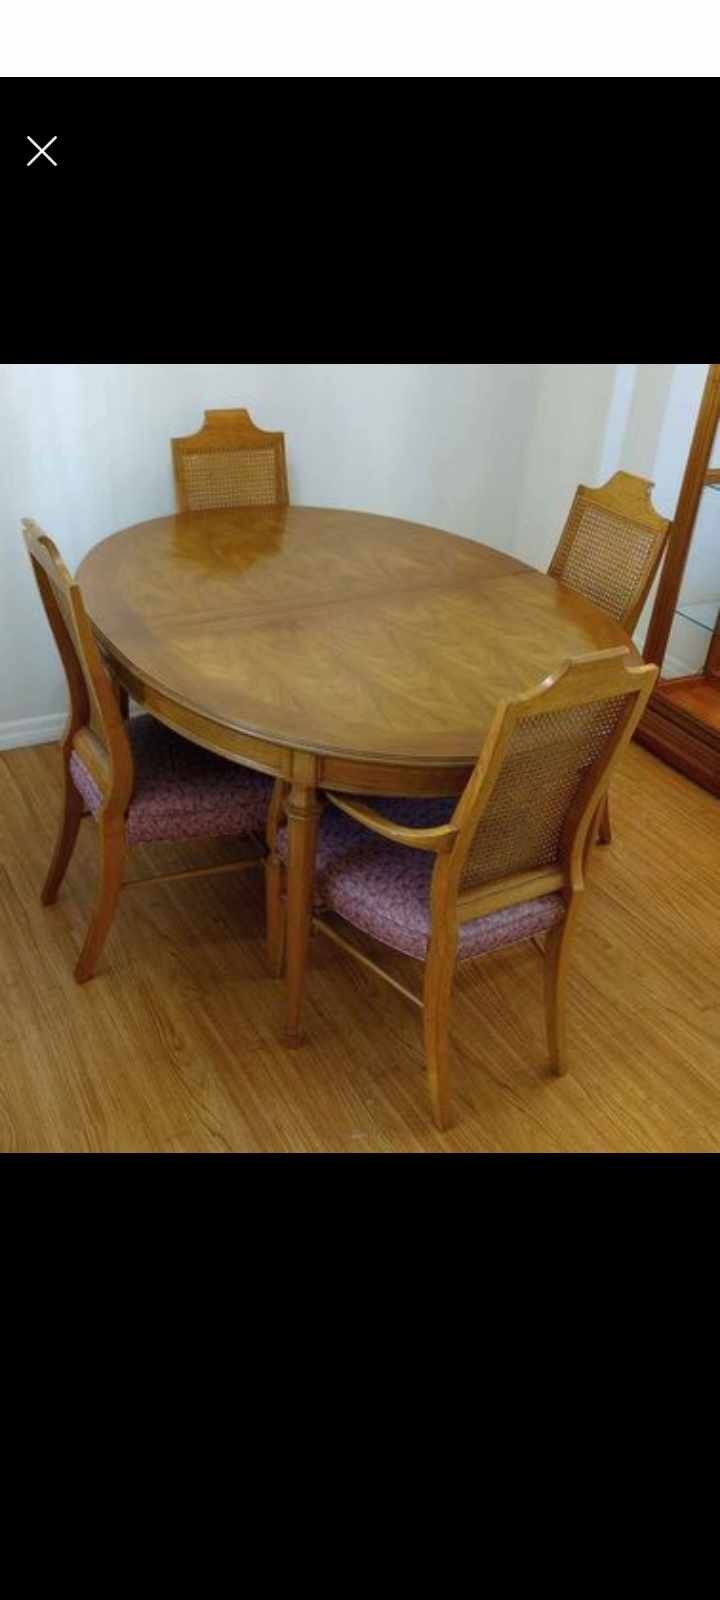 Kitchen Table With 2 Leafs And 8 Chairs